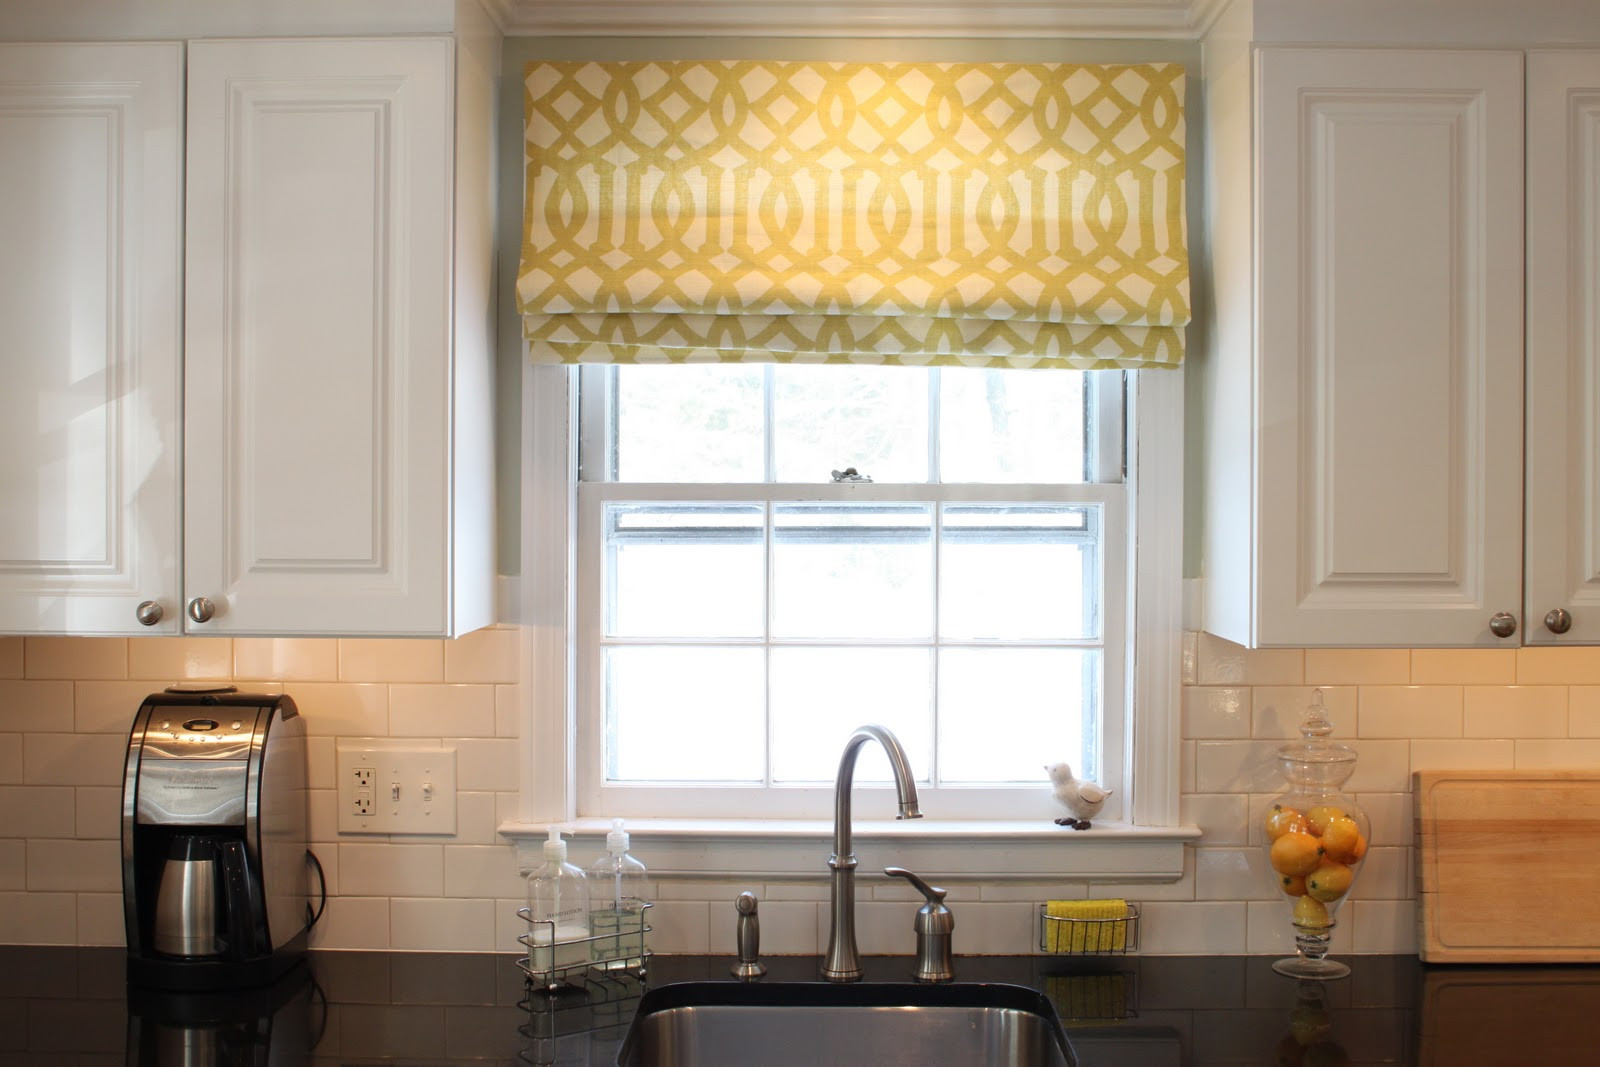 Kitchen Window Valances Modern
 Here Are Some Ideas For Your Kitchen Window Treatments